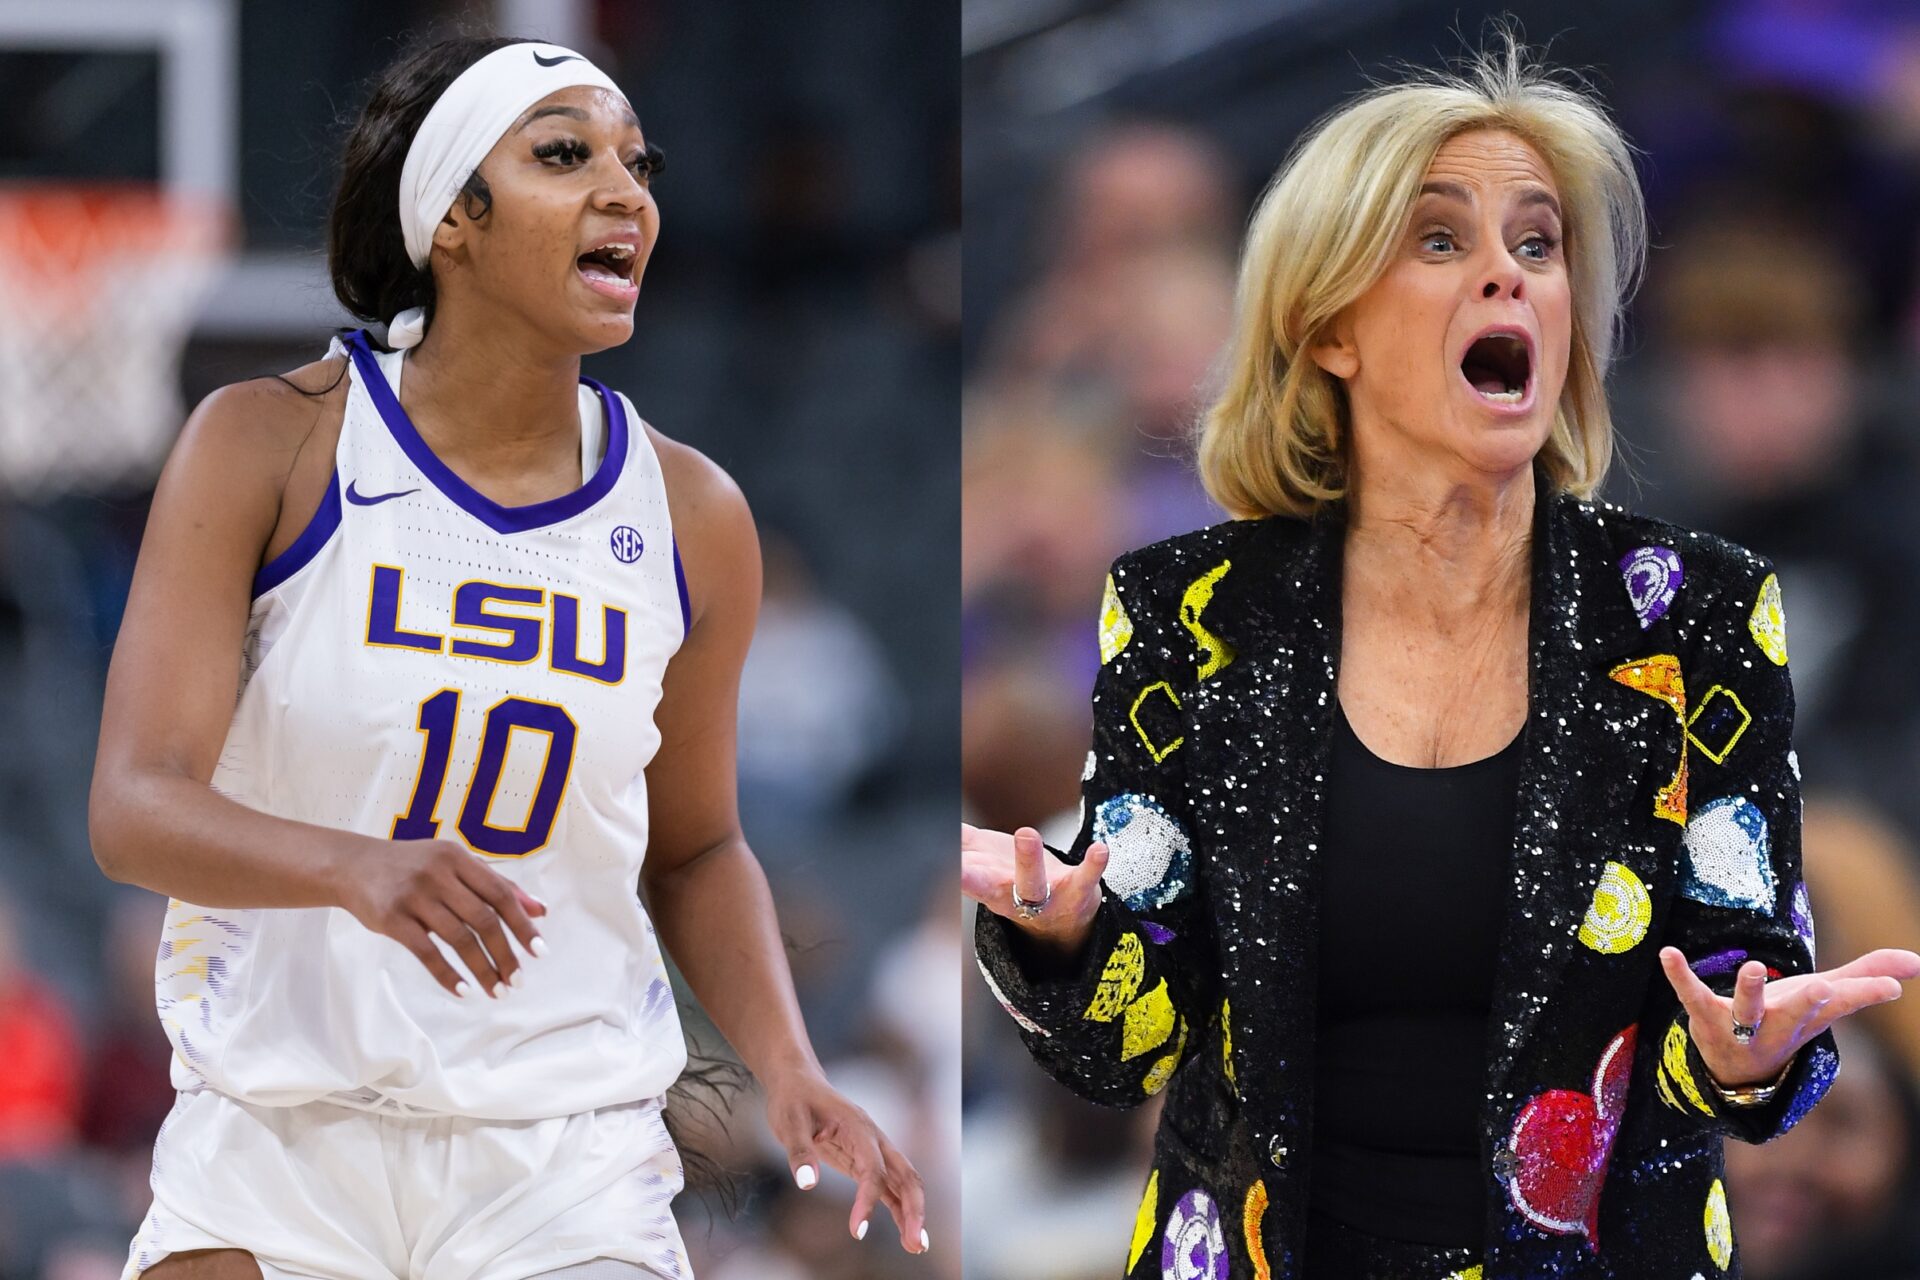 LSU’s Angel Reese Tries To Calm Kim Mulkey After Coach Was Ejected From Game